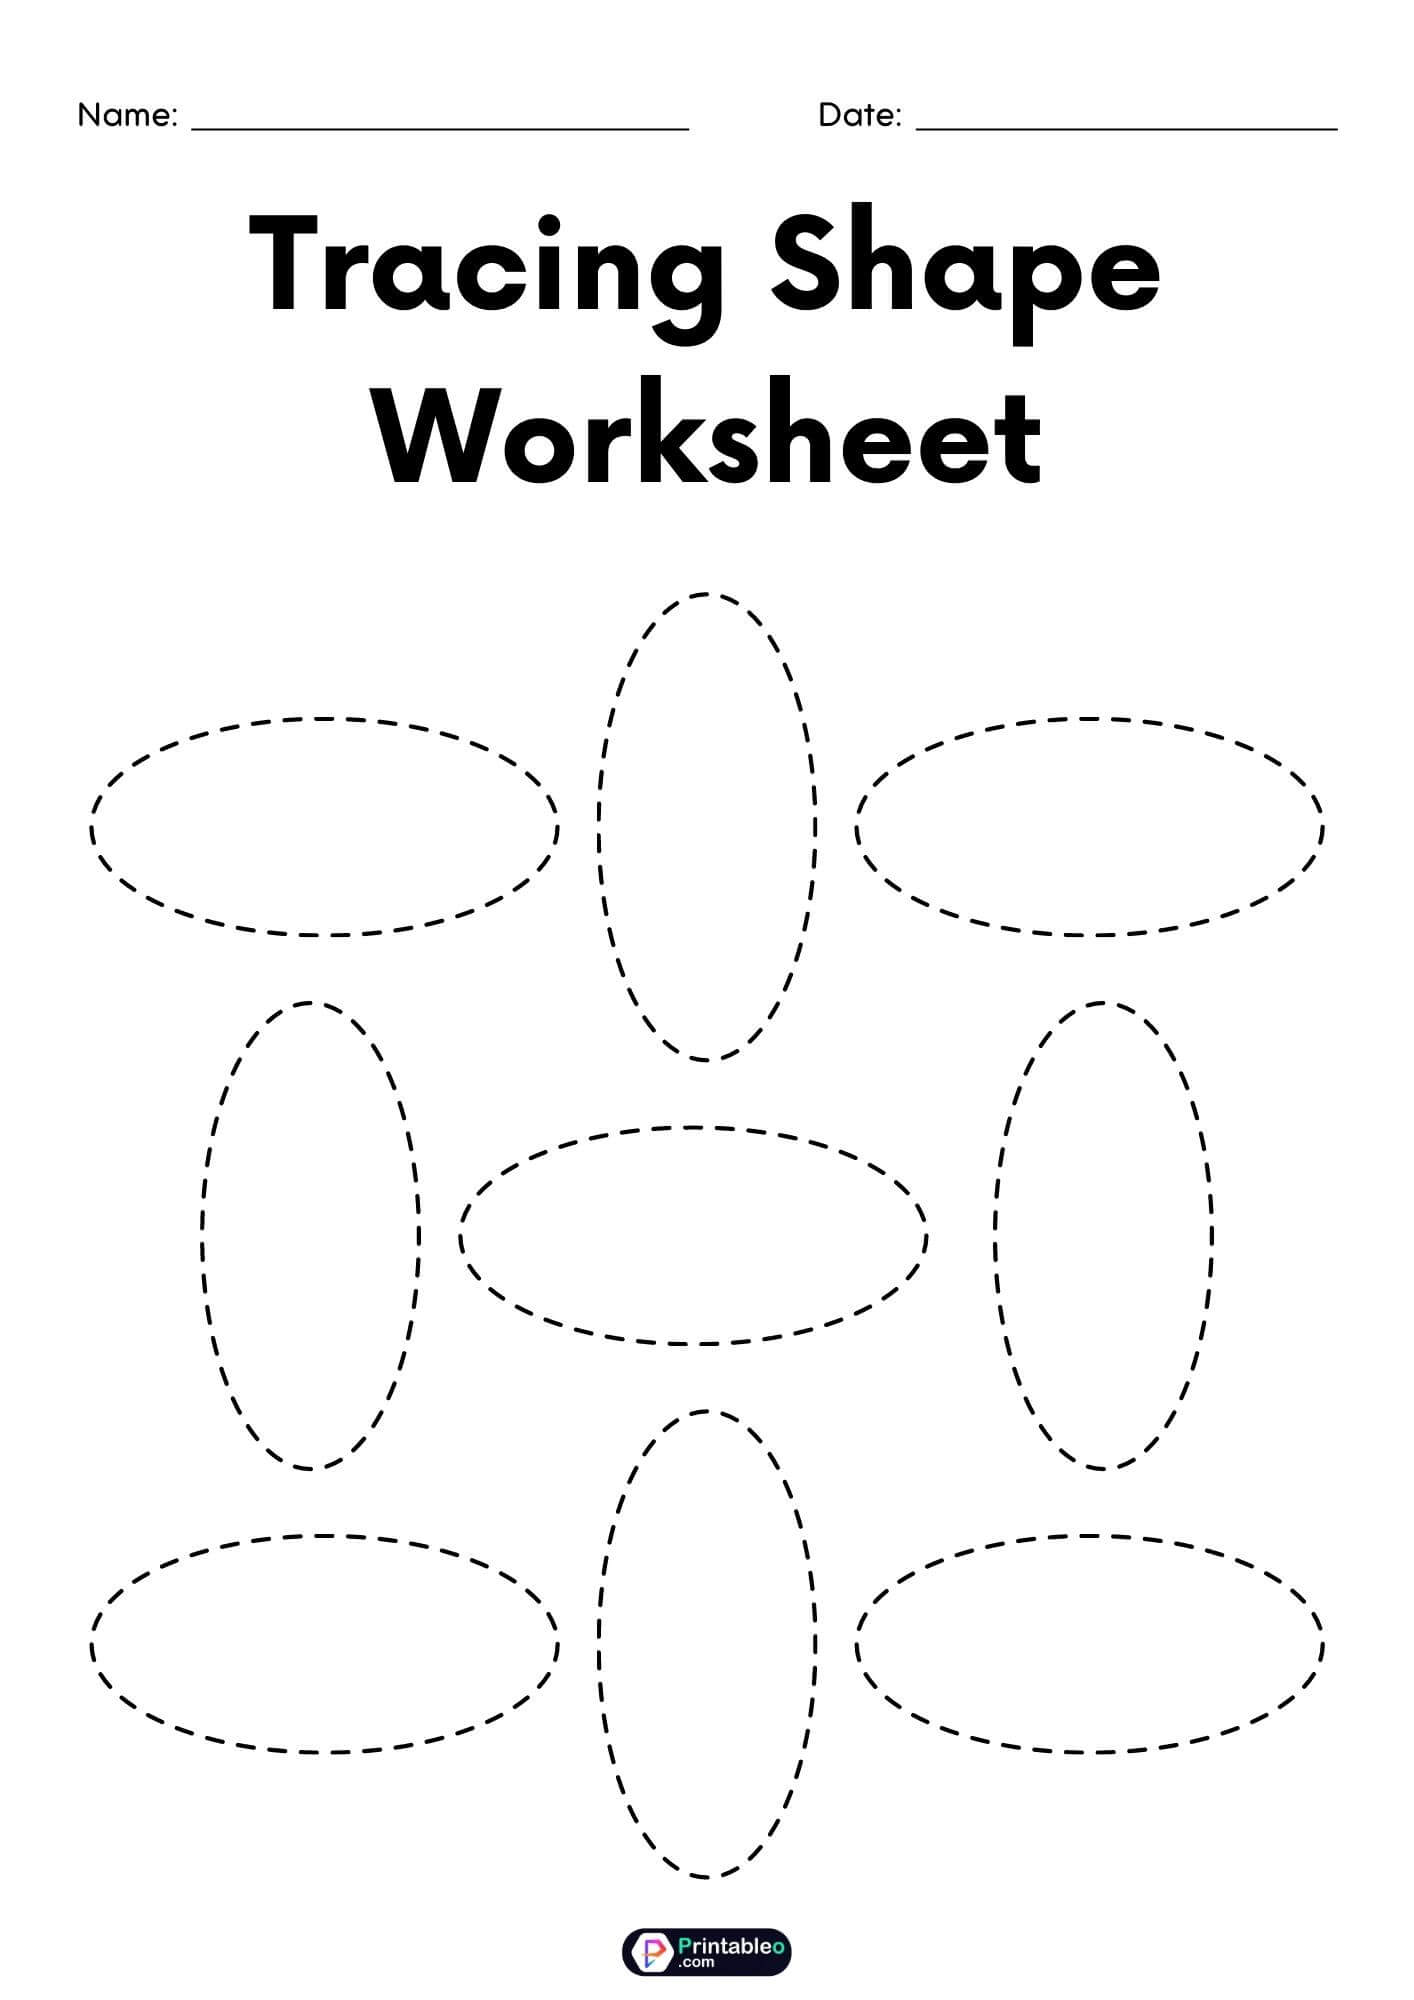 15 Tracing Shapes Worksheets Free Printable Pdfs 6430